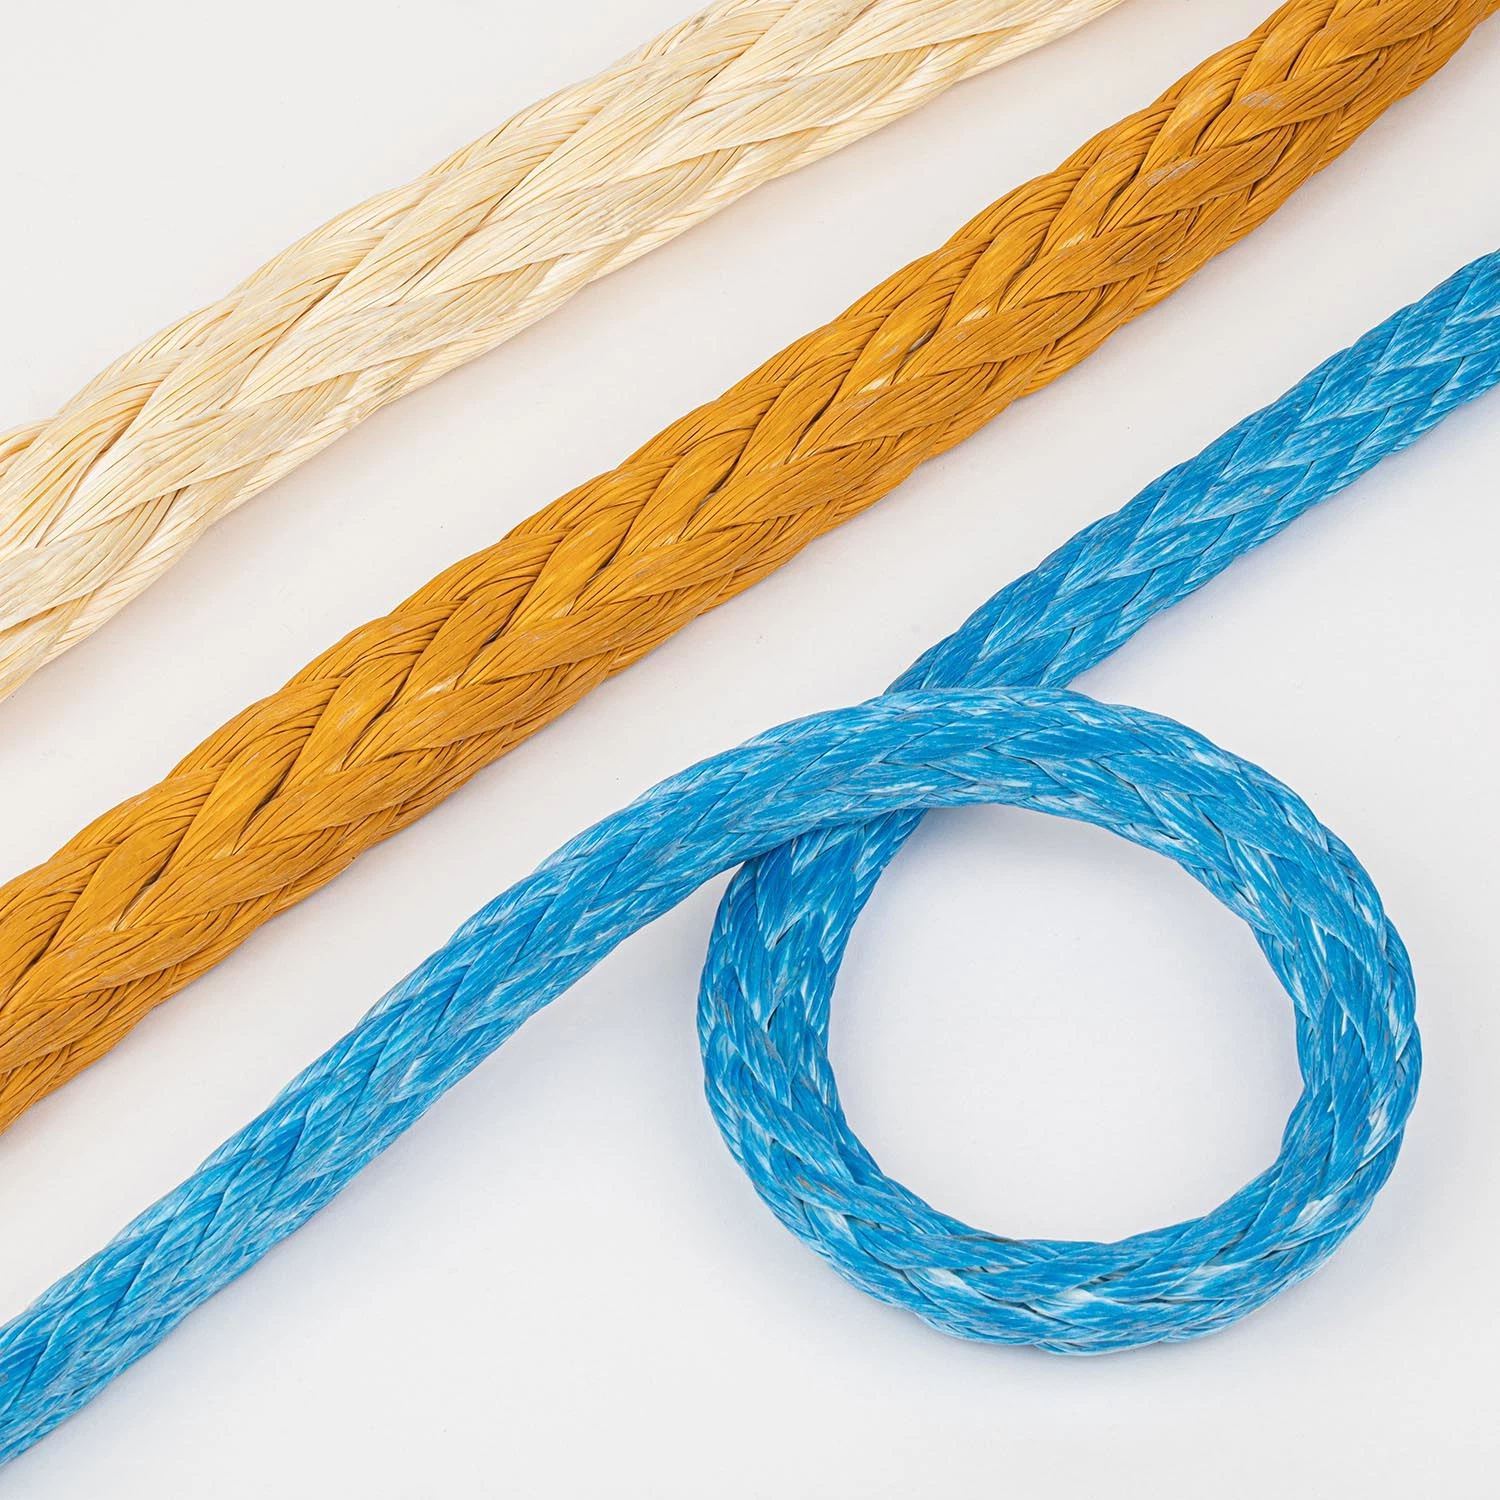 High quality/High cost performance 12 Strand Polyester/Nylon/PP/PE/Polypropylene/Mixed/Hmpe/UHMWPE/Hmwpe Hawser Tow Marine Mooring Rigging Towing Winch Rope